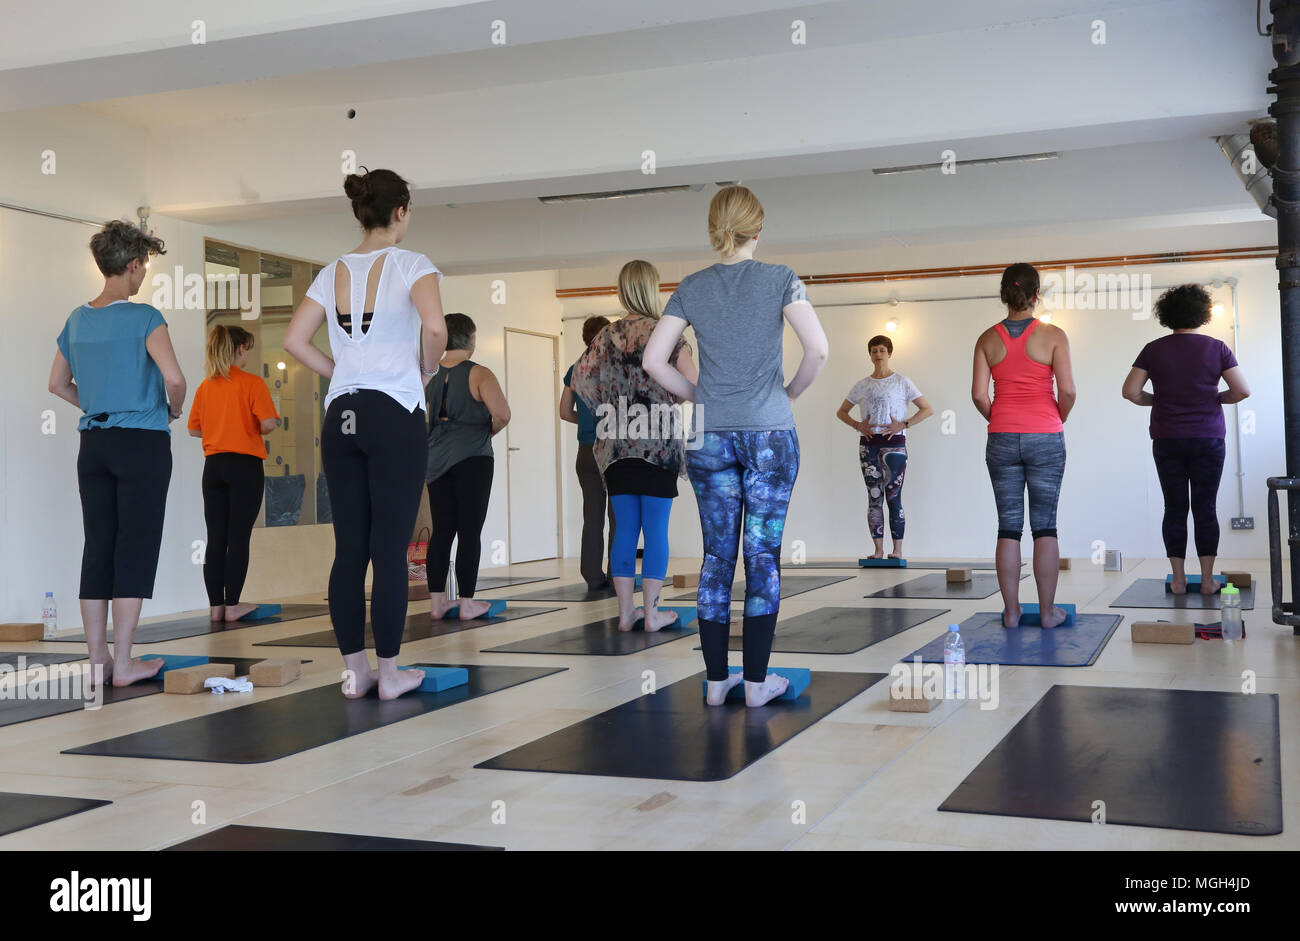 A pilates class in progress at the Peckham Levels, the newly converted multi-storey car park in this now-trendy part of South East London, UK Stock Photo